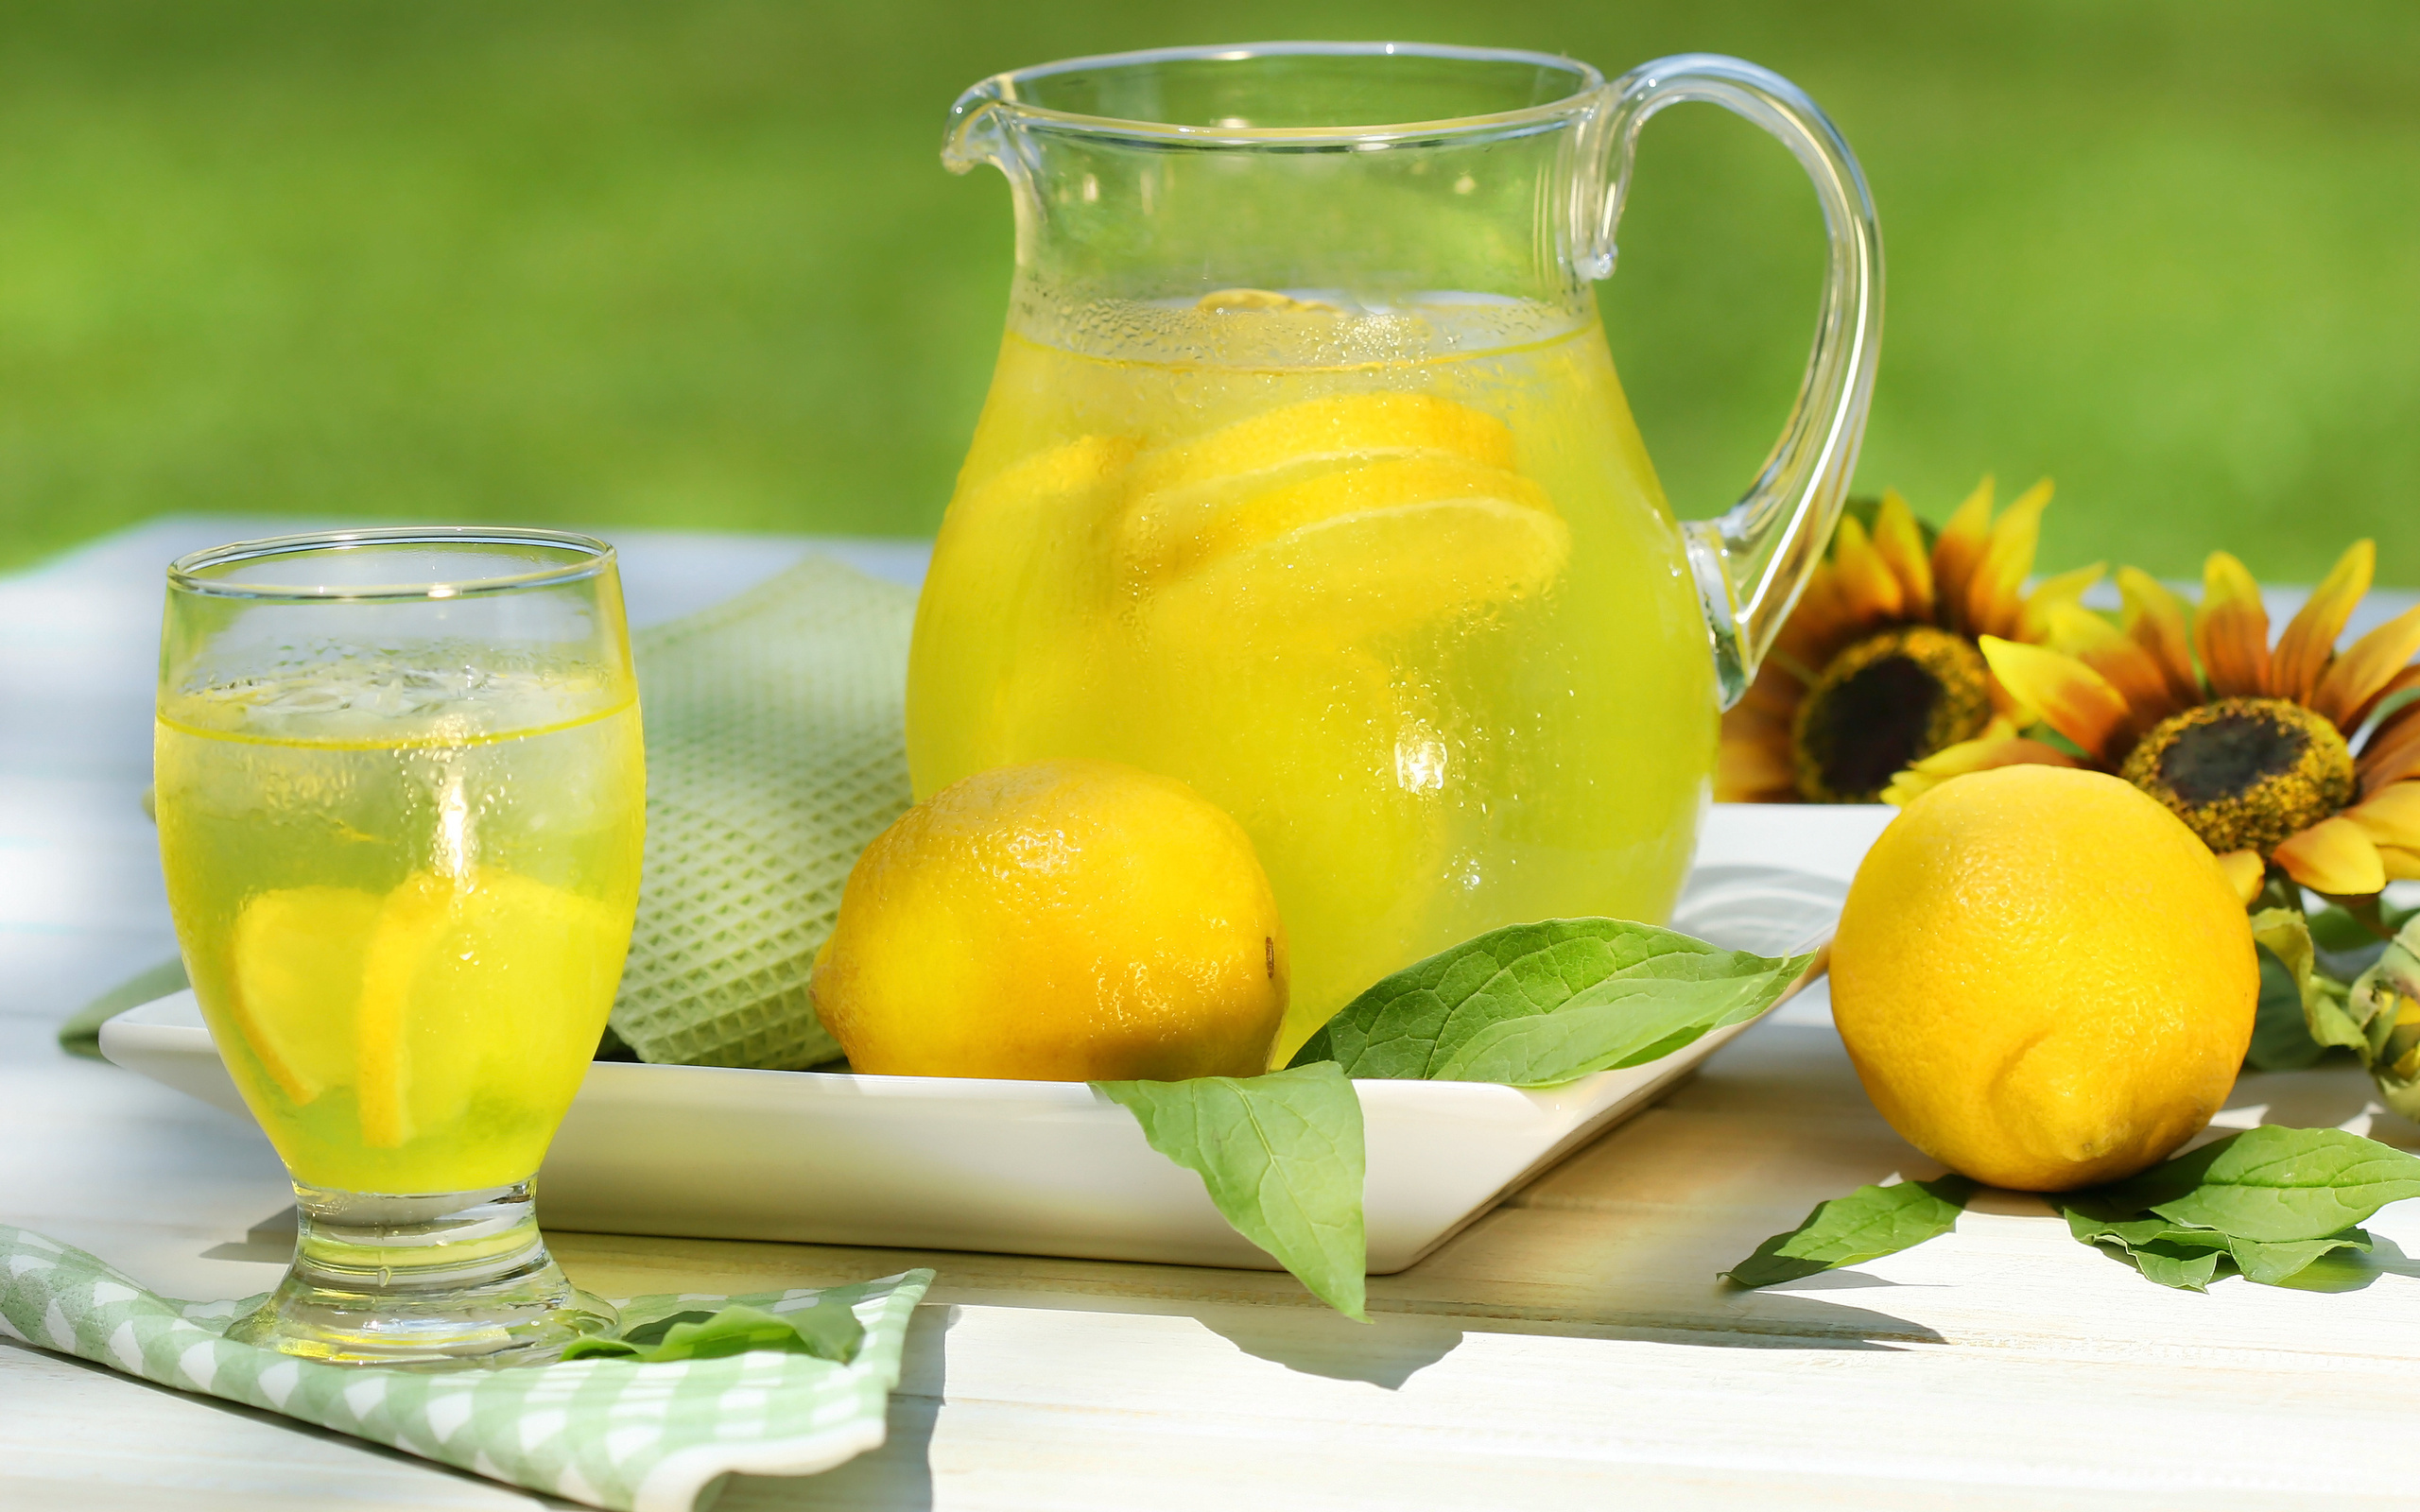 Lemonade: A citrus-based beverage typically made from lemons, water, and sugar. 2560x1600 HD Wallpaper.